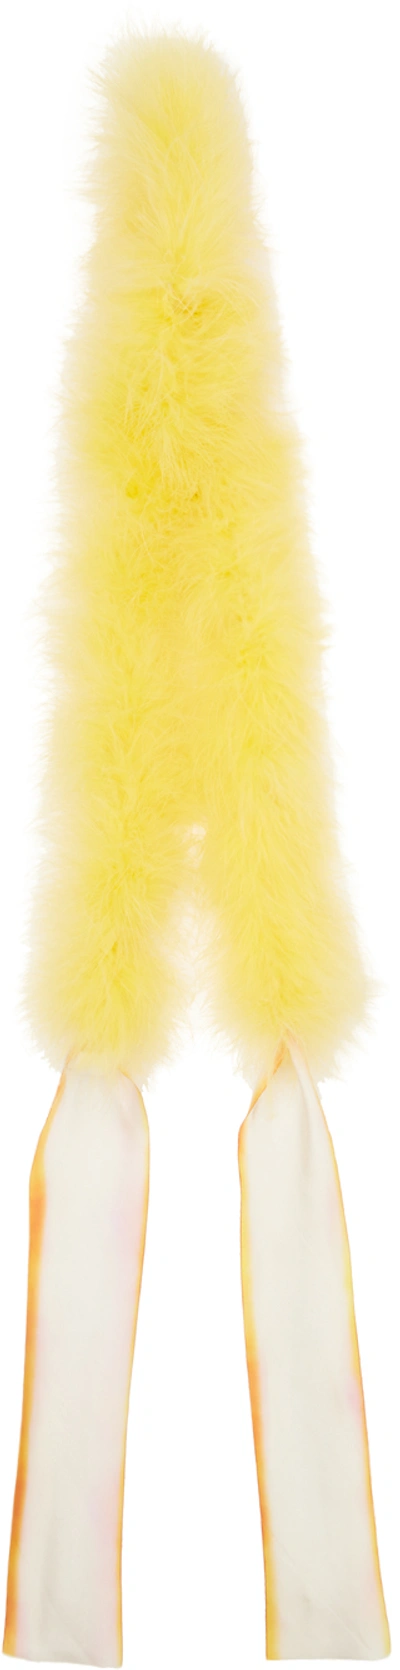 Anna Sui Yellow Marabou Scarf In Canary Yellow Multi